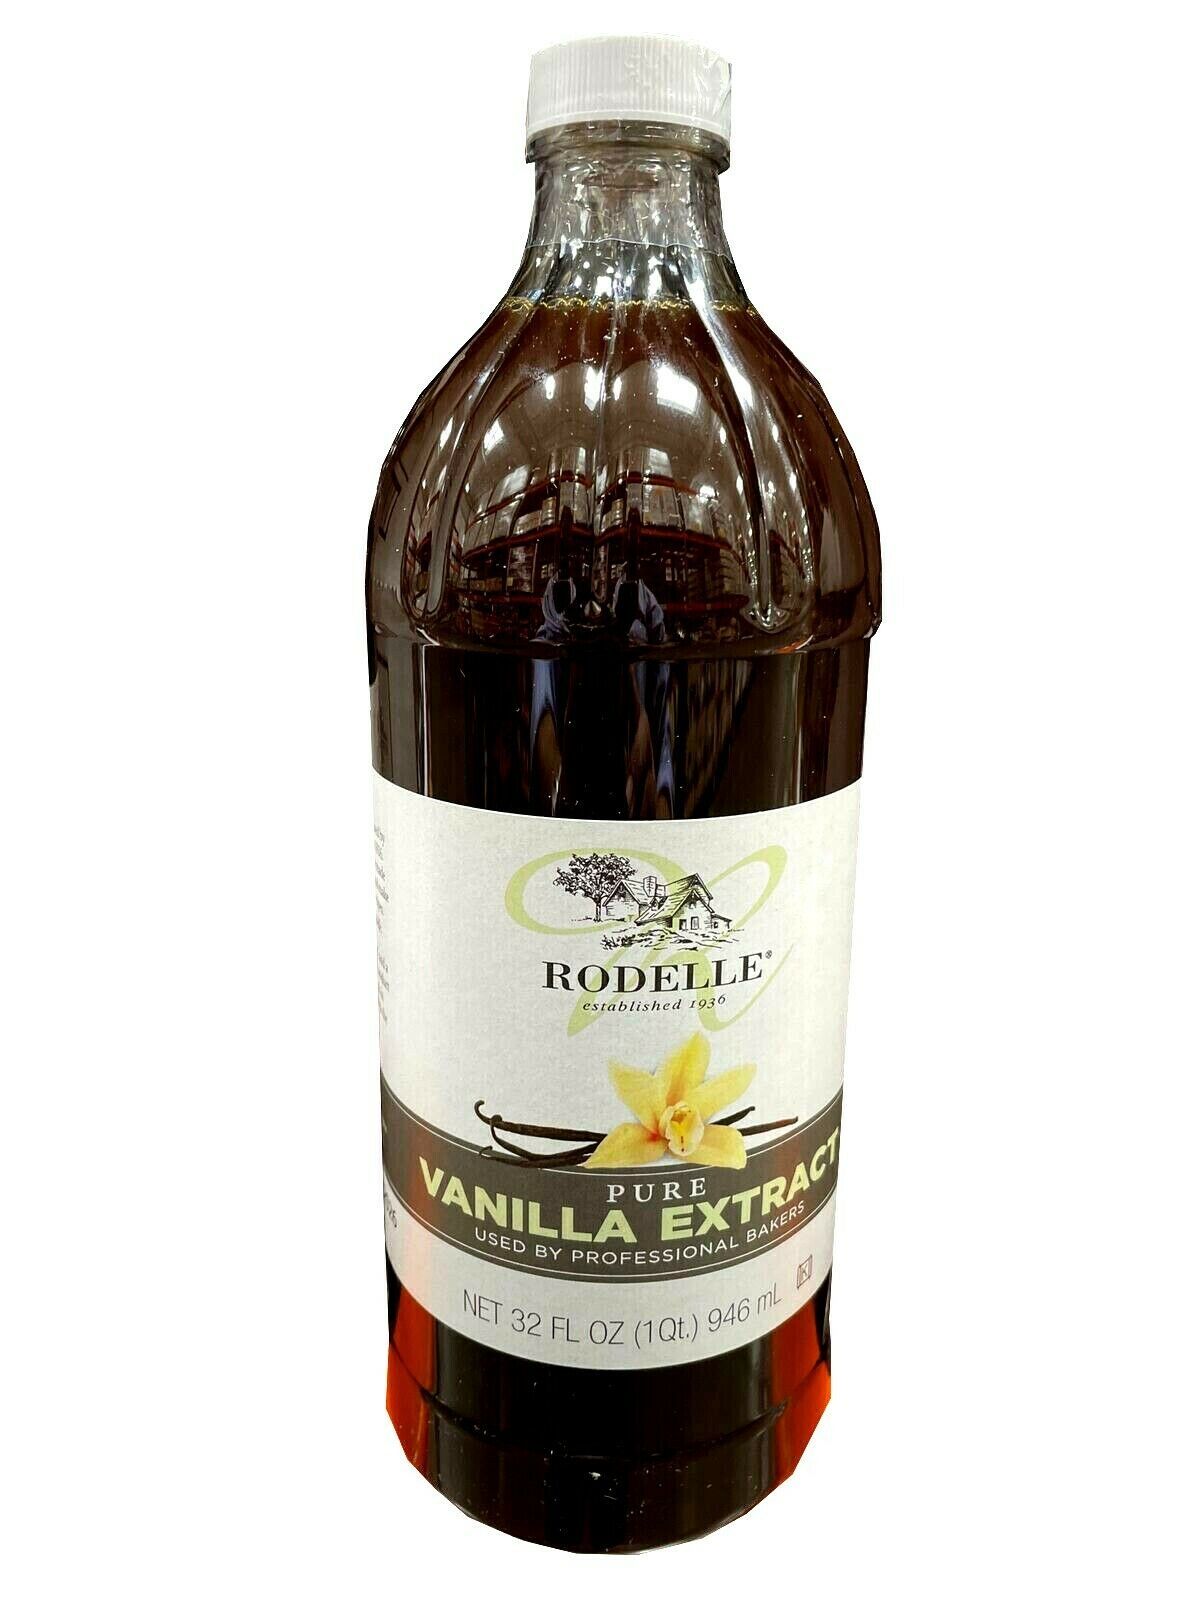  Rodelle Pure Vanilla Extract - 32 oz Used Professional Bankers  - $46.08